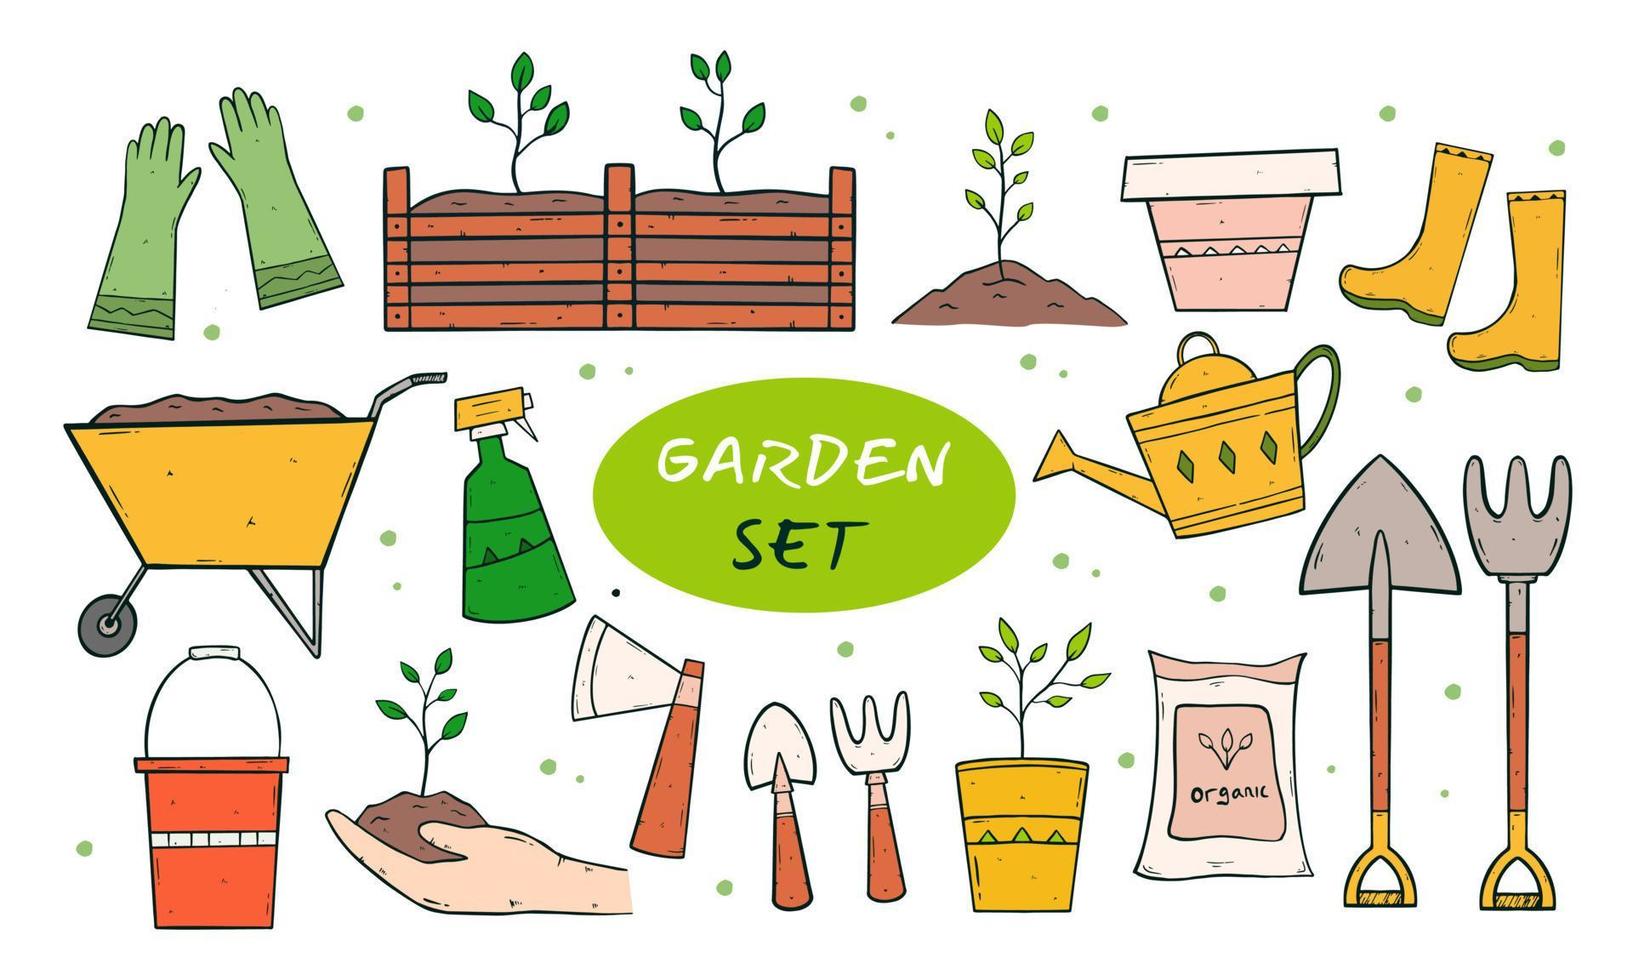 Set Of Garden Themed. Illustration Vector Graphic With Hand Drawn Isolated Doodle On The Theme Of Garden, Garden Tools.  Sketches For Use In Design